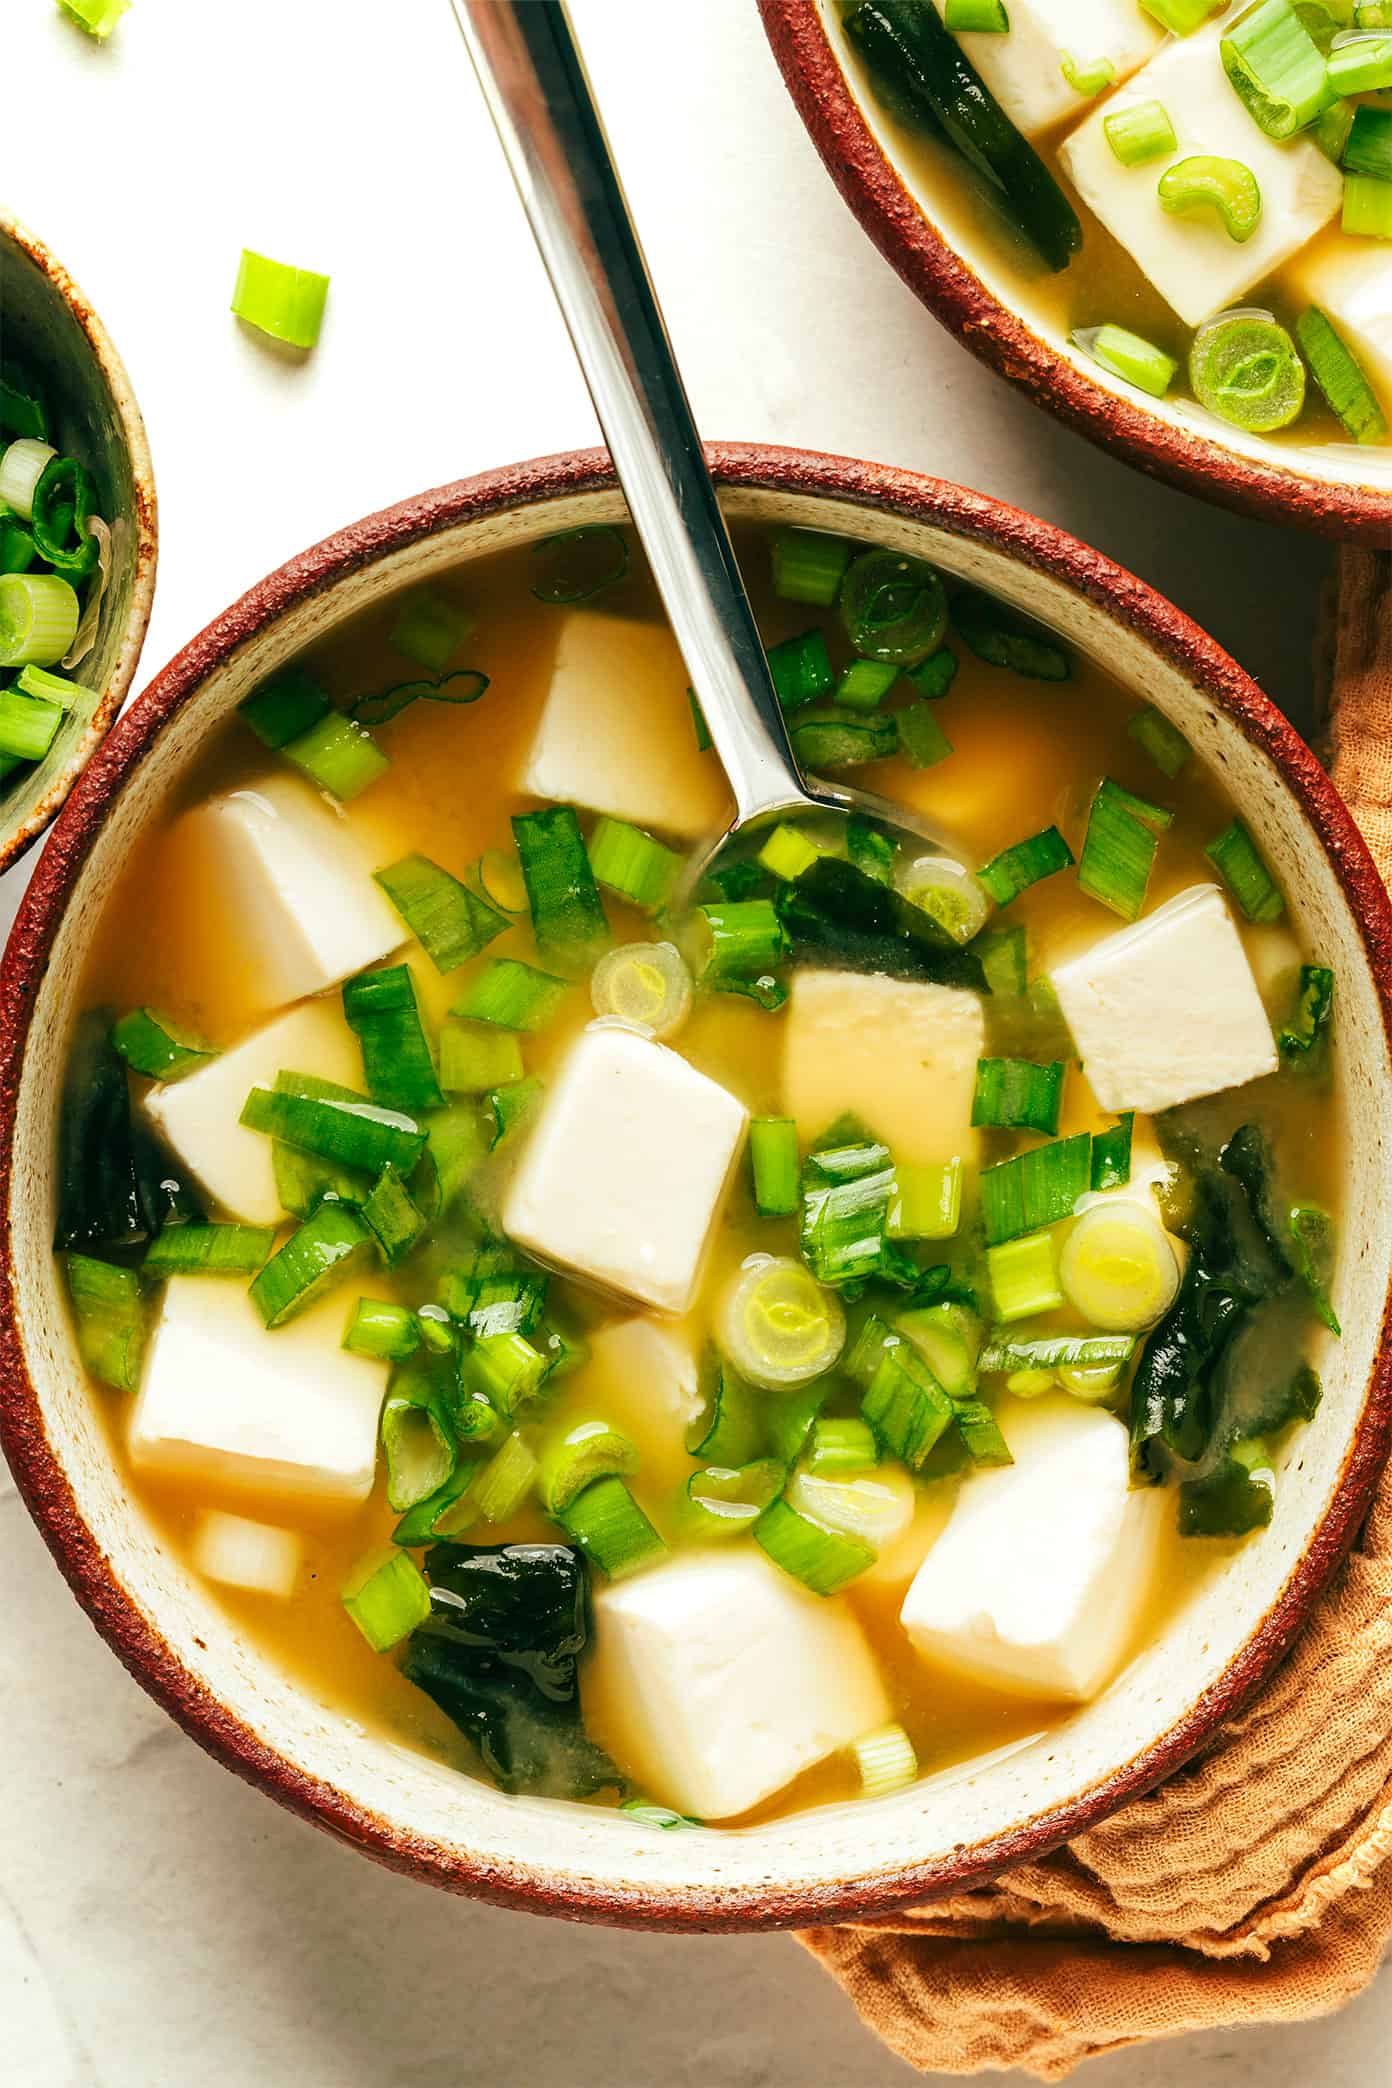 How to Make Simple & Delicious Miso Soup - The Japanese Kitchen